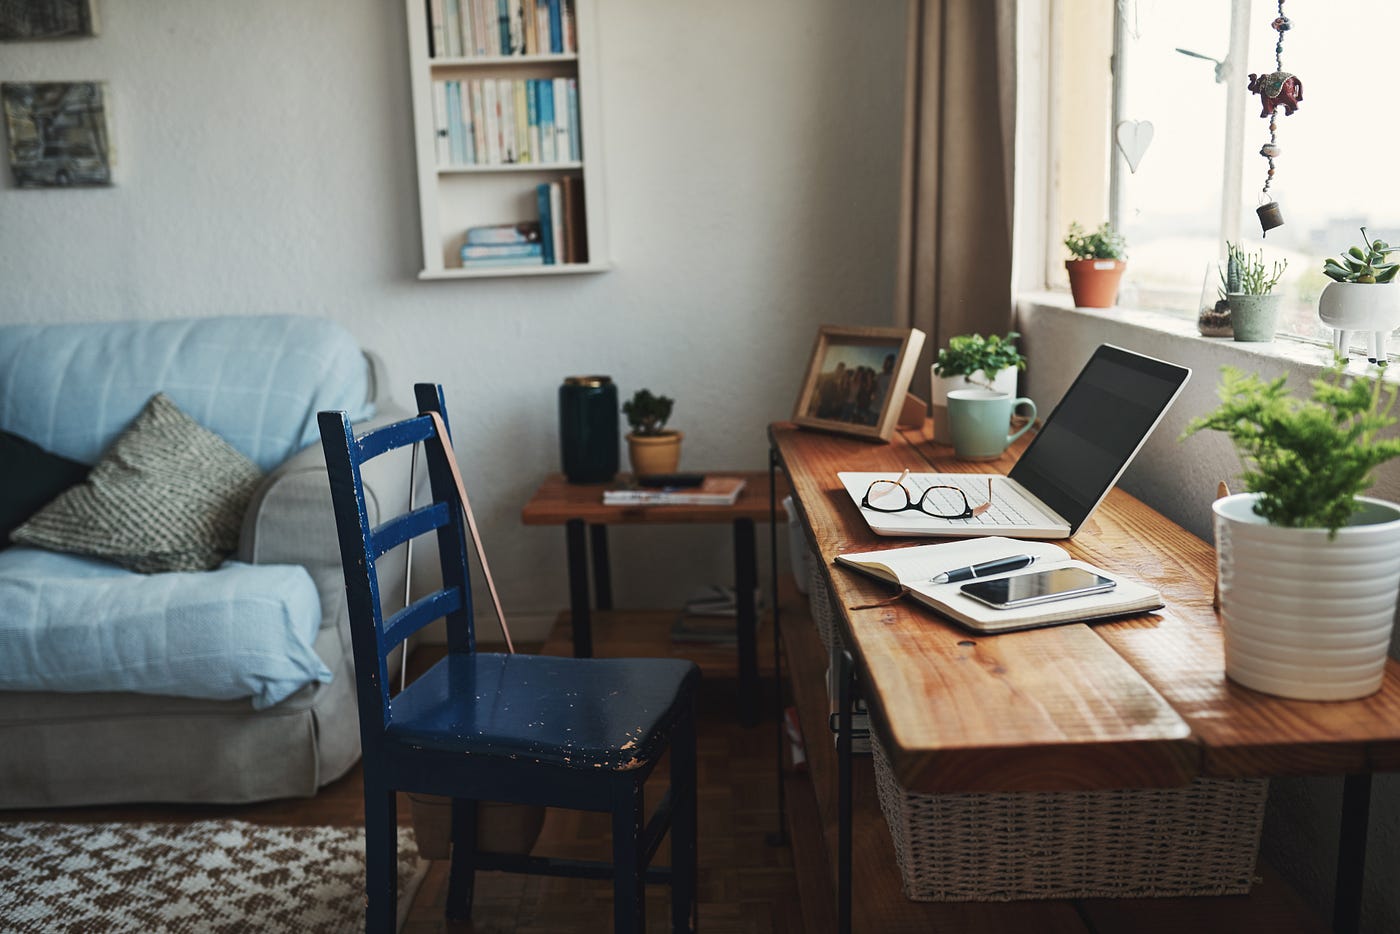 WFH, Office Ergonomics 101: Stay healthy while working from home